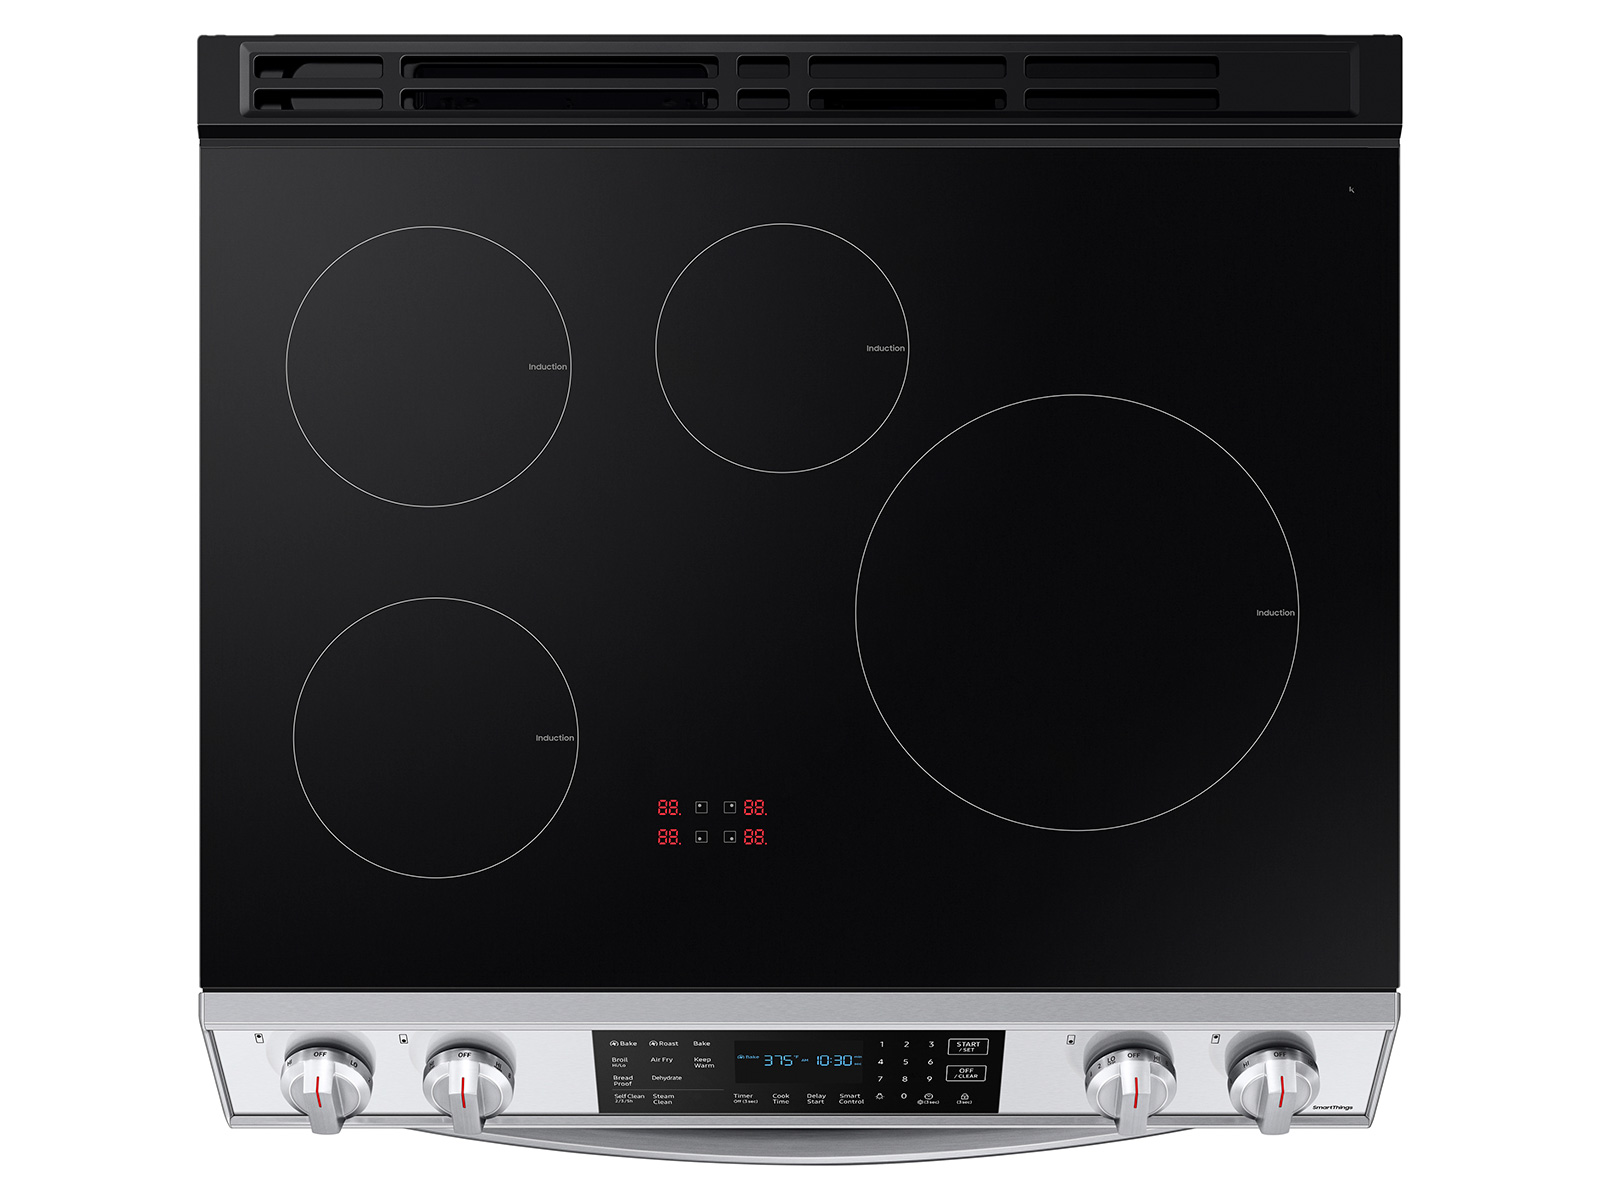 Bulk-buy Power Consumption Portable Built-in Single Burner Electric Cooktop  Infrared Stove price comparison